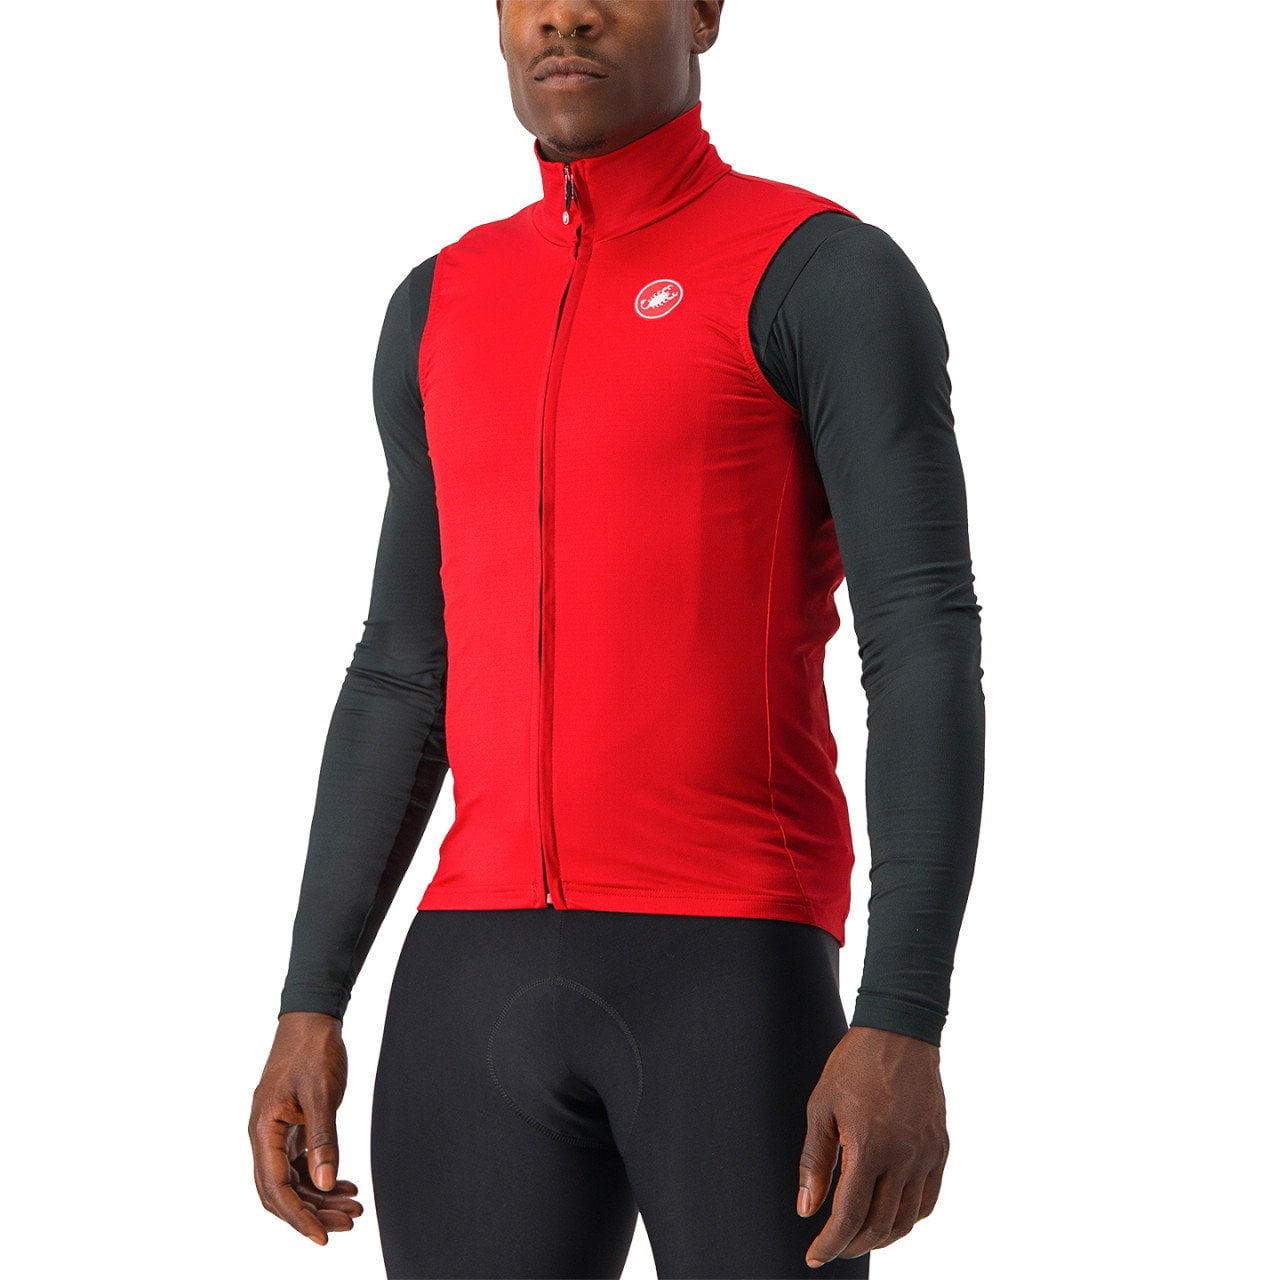 Thermal Pro Mid Thermal Vest